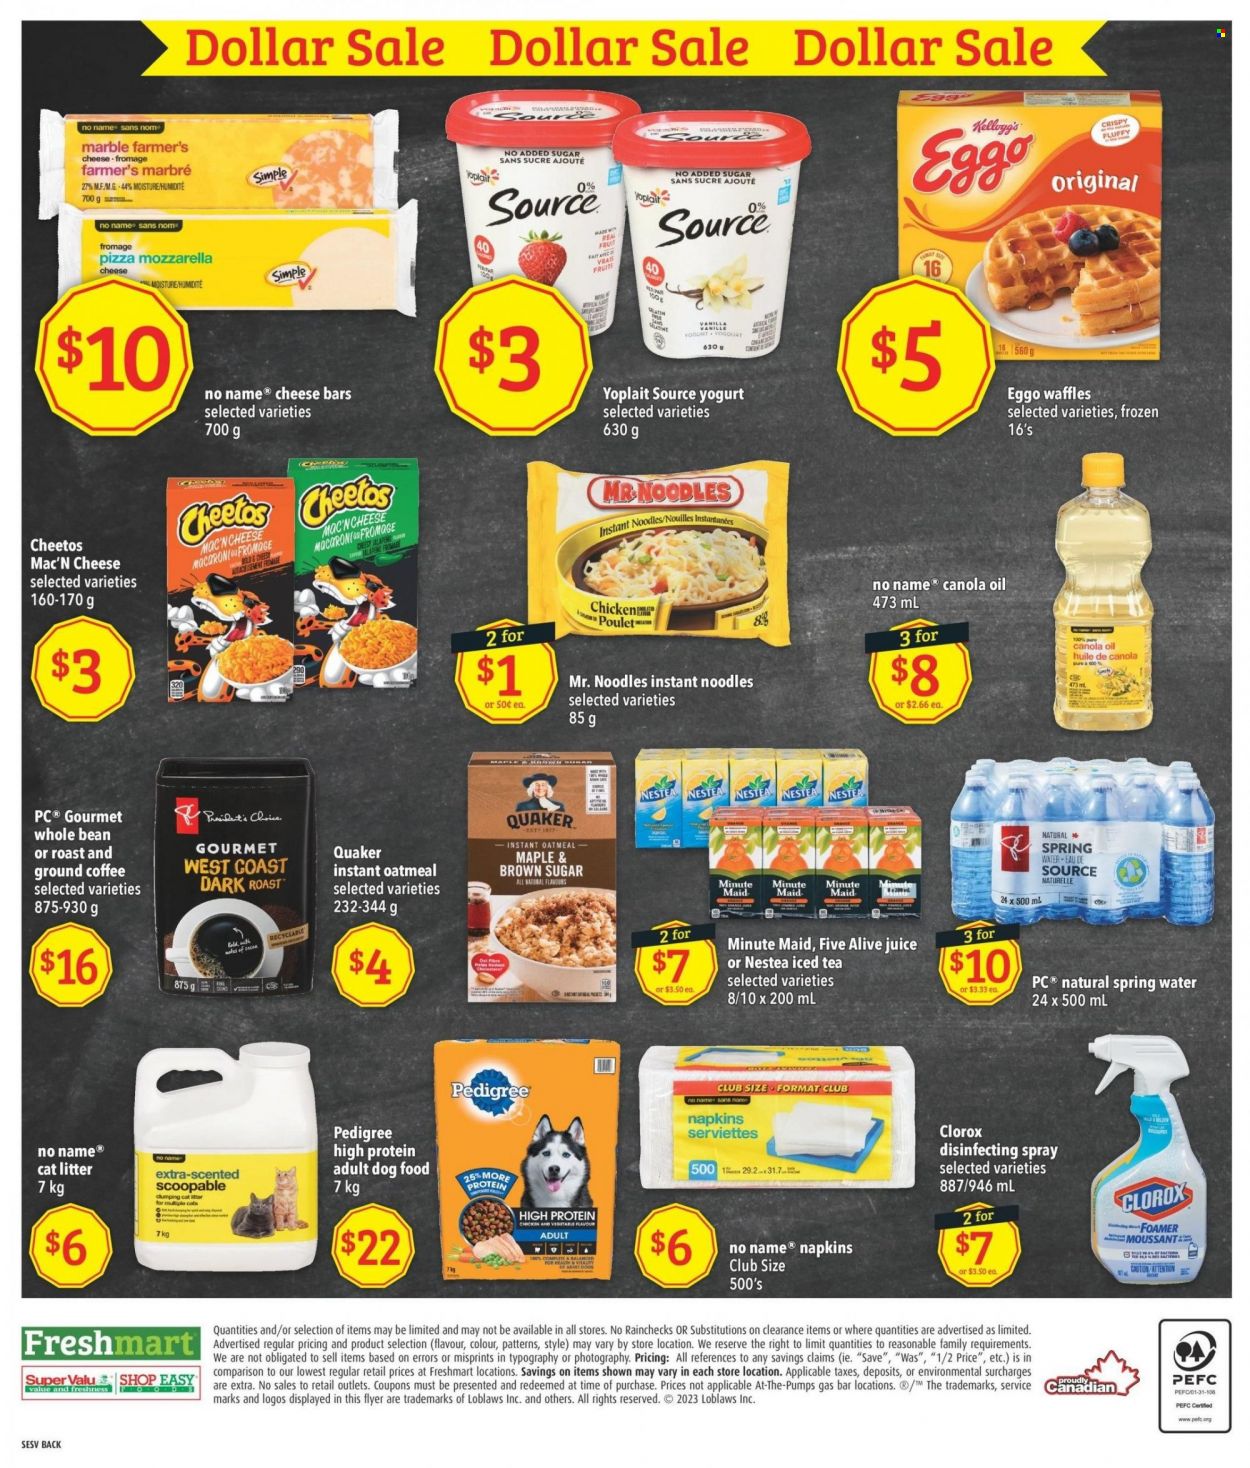 thumbnail - Freshmart Flyer - January 26, 2023 - February 01, 2023 - Sales products - waffles, jalapeño, No Name, pizza, instant noodles, Quaker, noodles, yoghurt, Yoplait, Kellogg's, Cheetos, oatmeal, canola oil, oil, juice, ice tea, fruit punch, spring water, coffee, ground coffee, napkins, Clorox, animal food, cat litter, dog food, Pedigree, gelatin. Page 12.